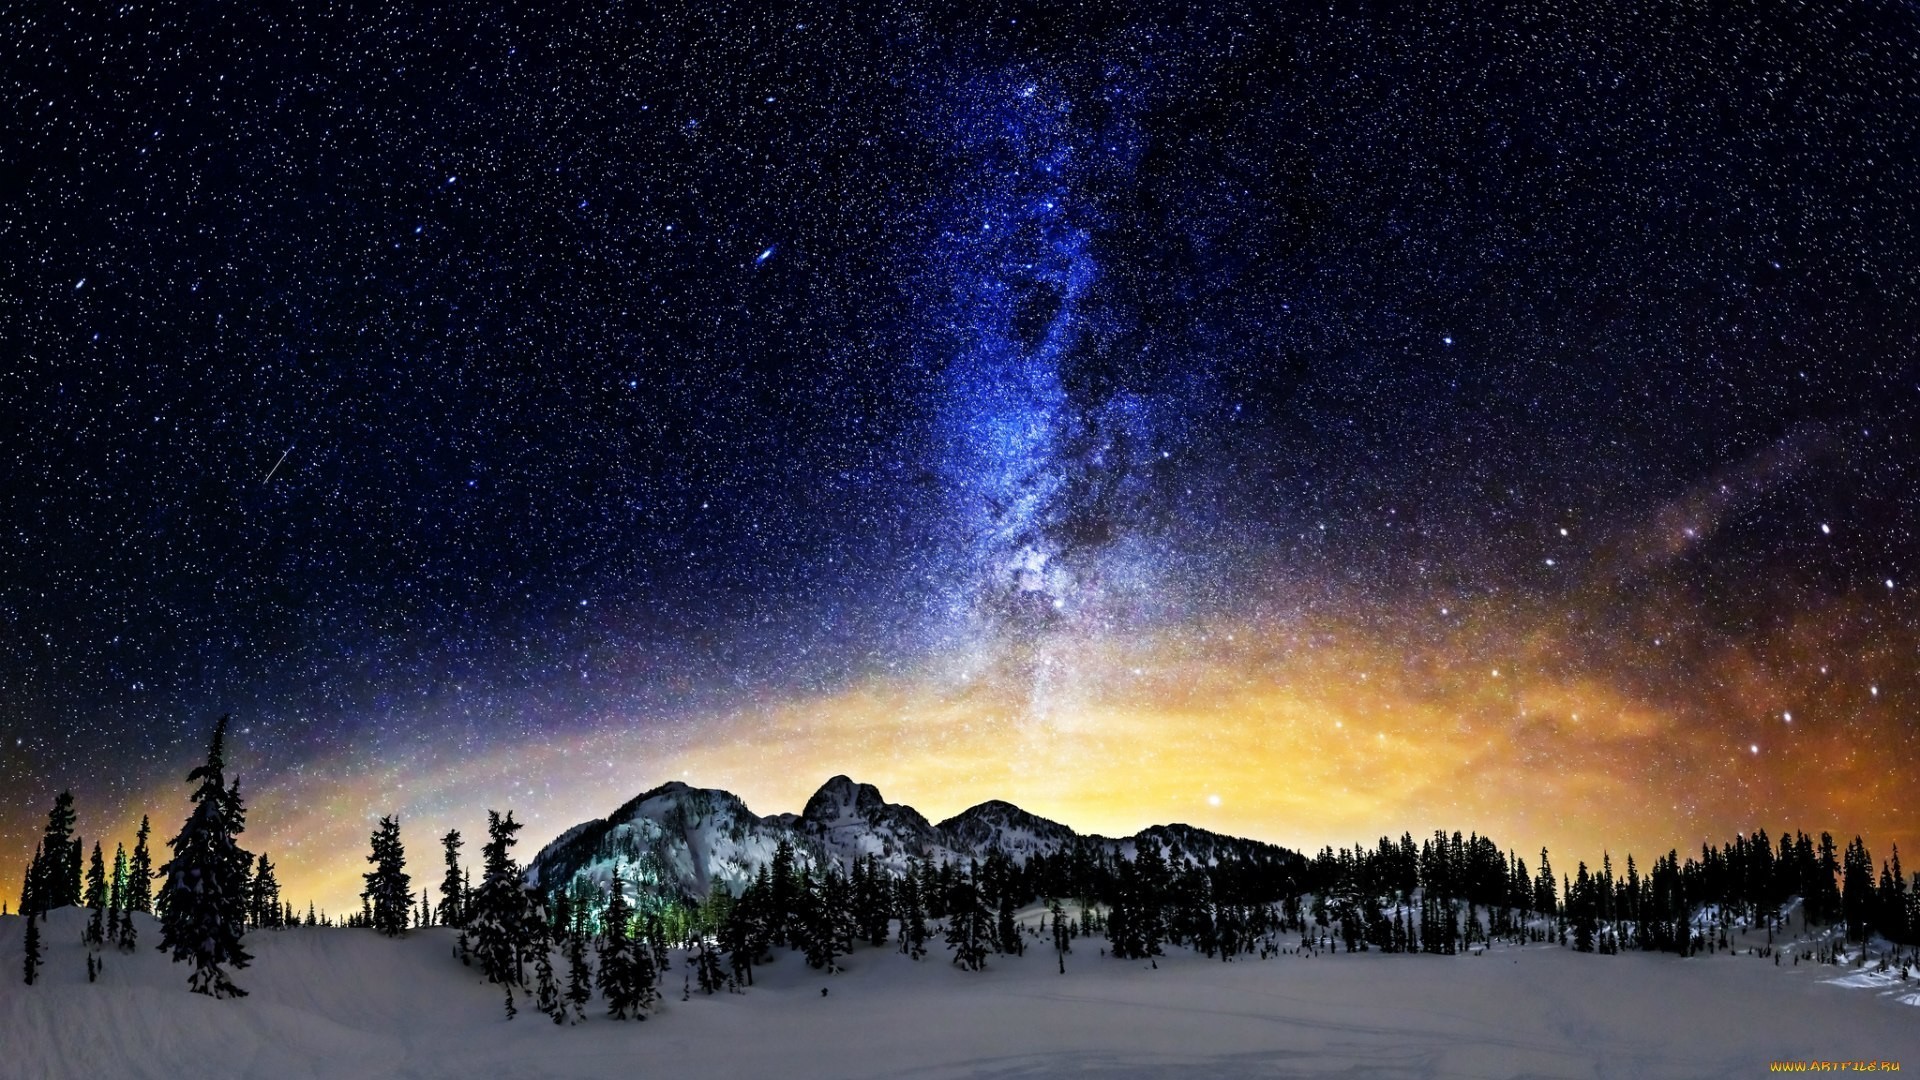 General 1920x1080 space art space sky mountains winter digital art nature starry night nordic landscapes cold ice snow outdoors